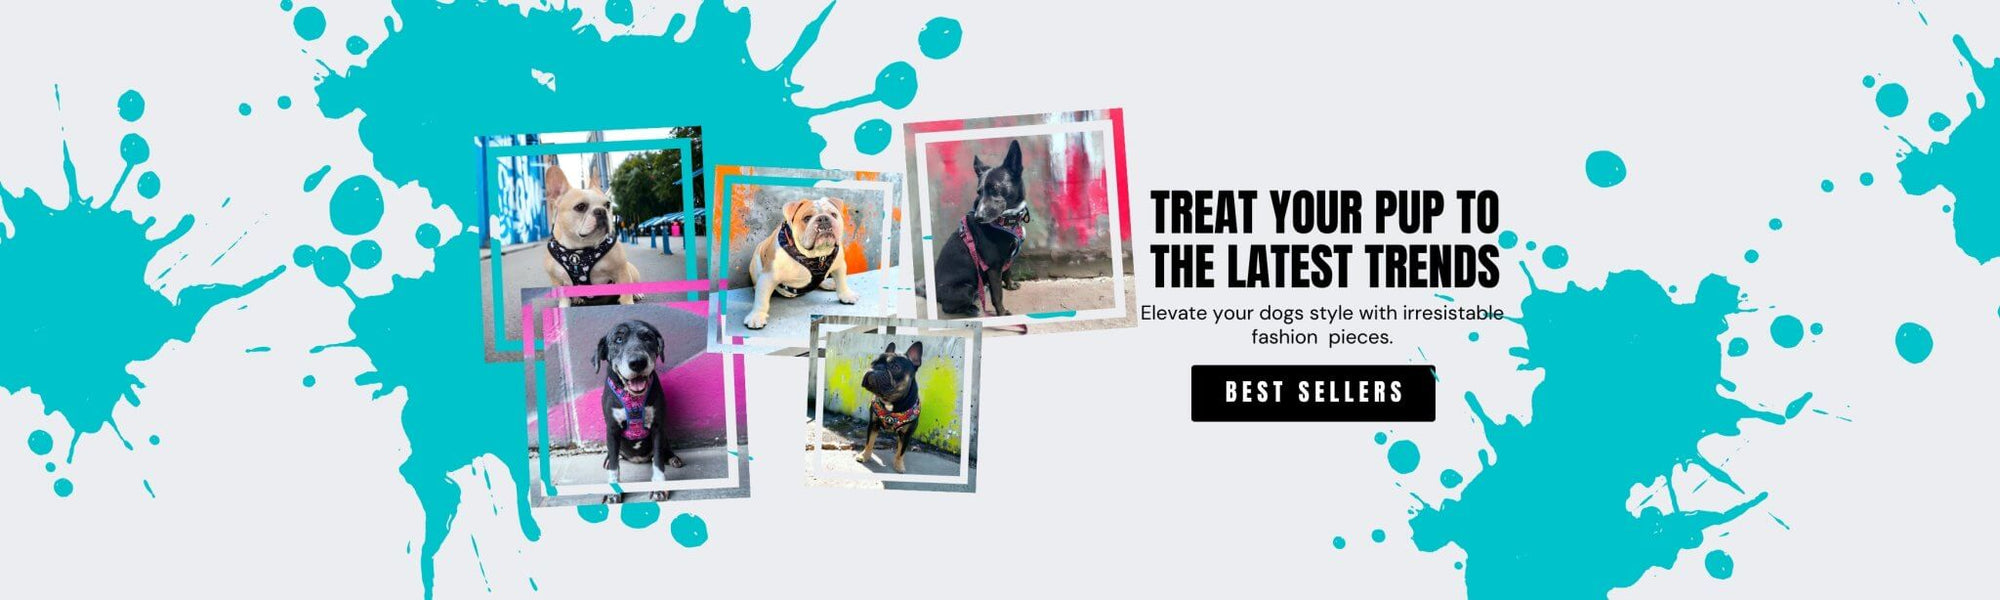 No Pull Dog Harnesses worn by French Bulldogs, English Bulldog, and mix breed dog against solid white background with teal paint splatter